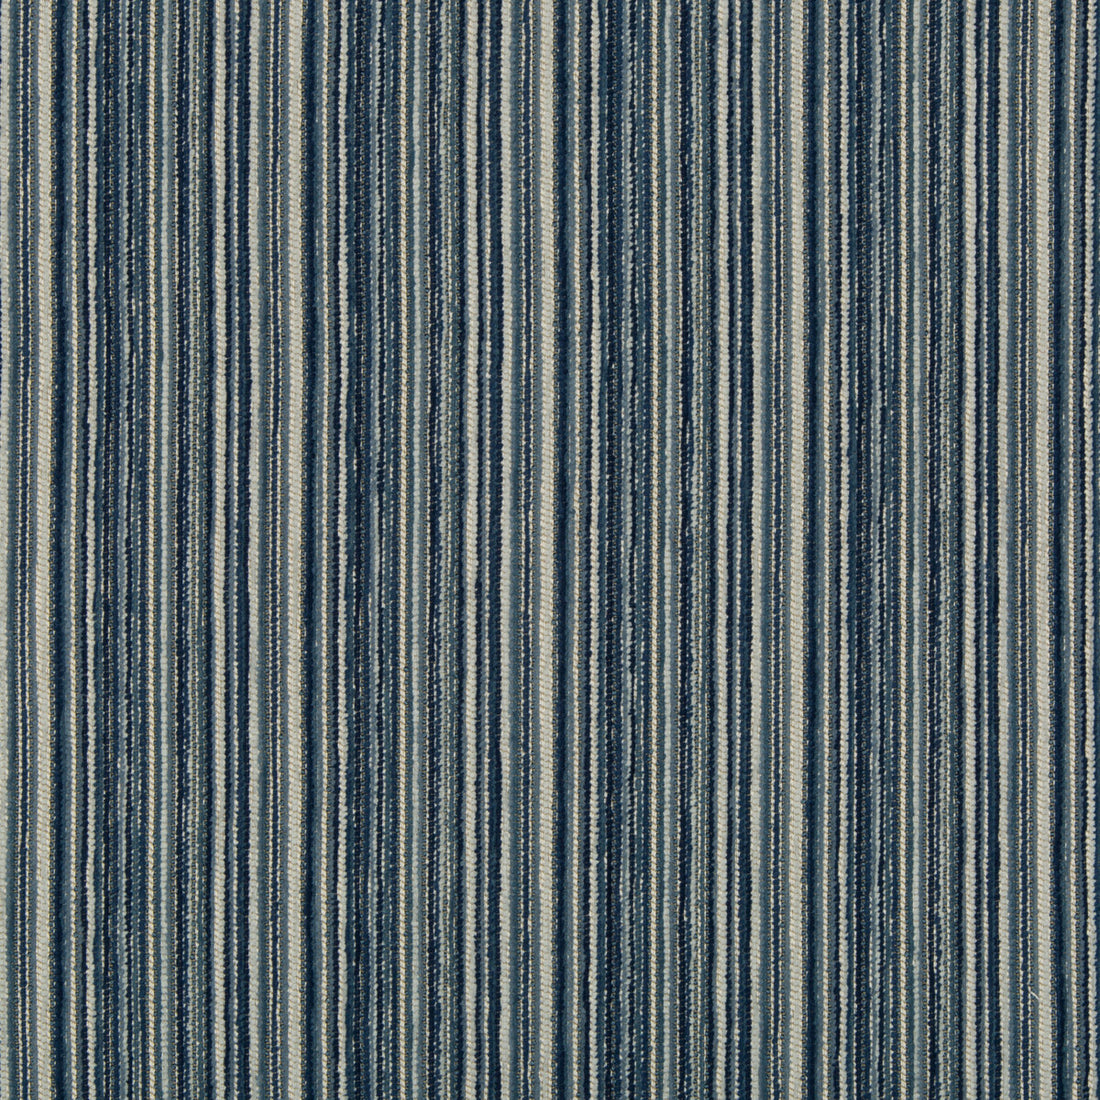 Kravet Design fabric in 34693-511 color - pattern 34693.511.0 - by Kravet Design in the Performance Crypton Home collection